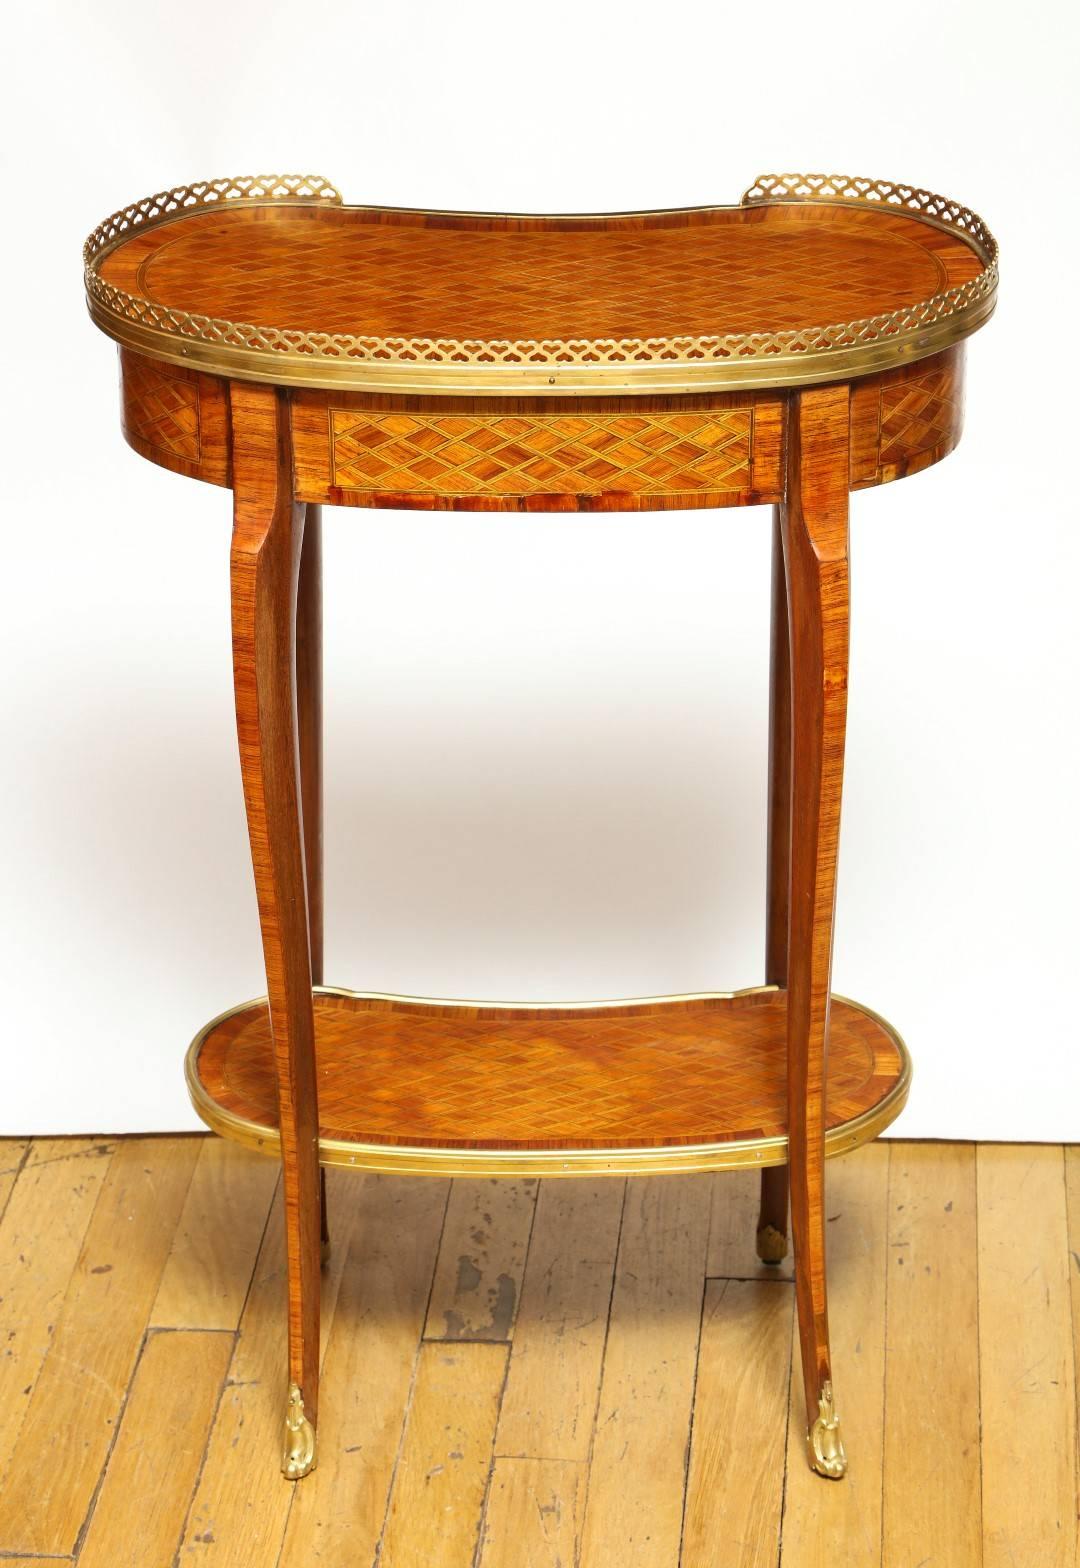 Gilt Louis XV Style Ormolu-Mounted Occasional Table